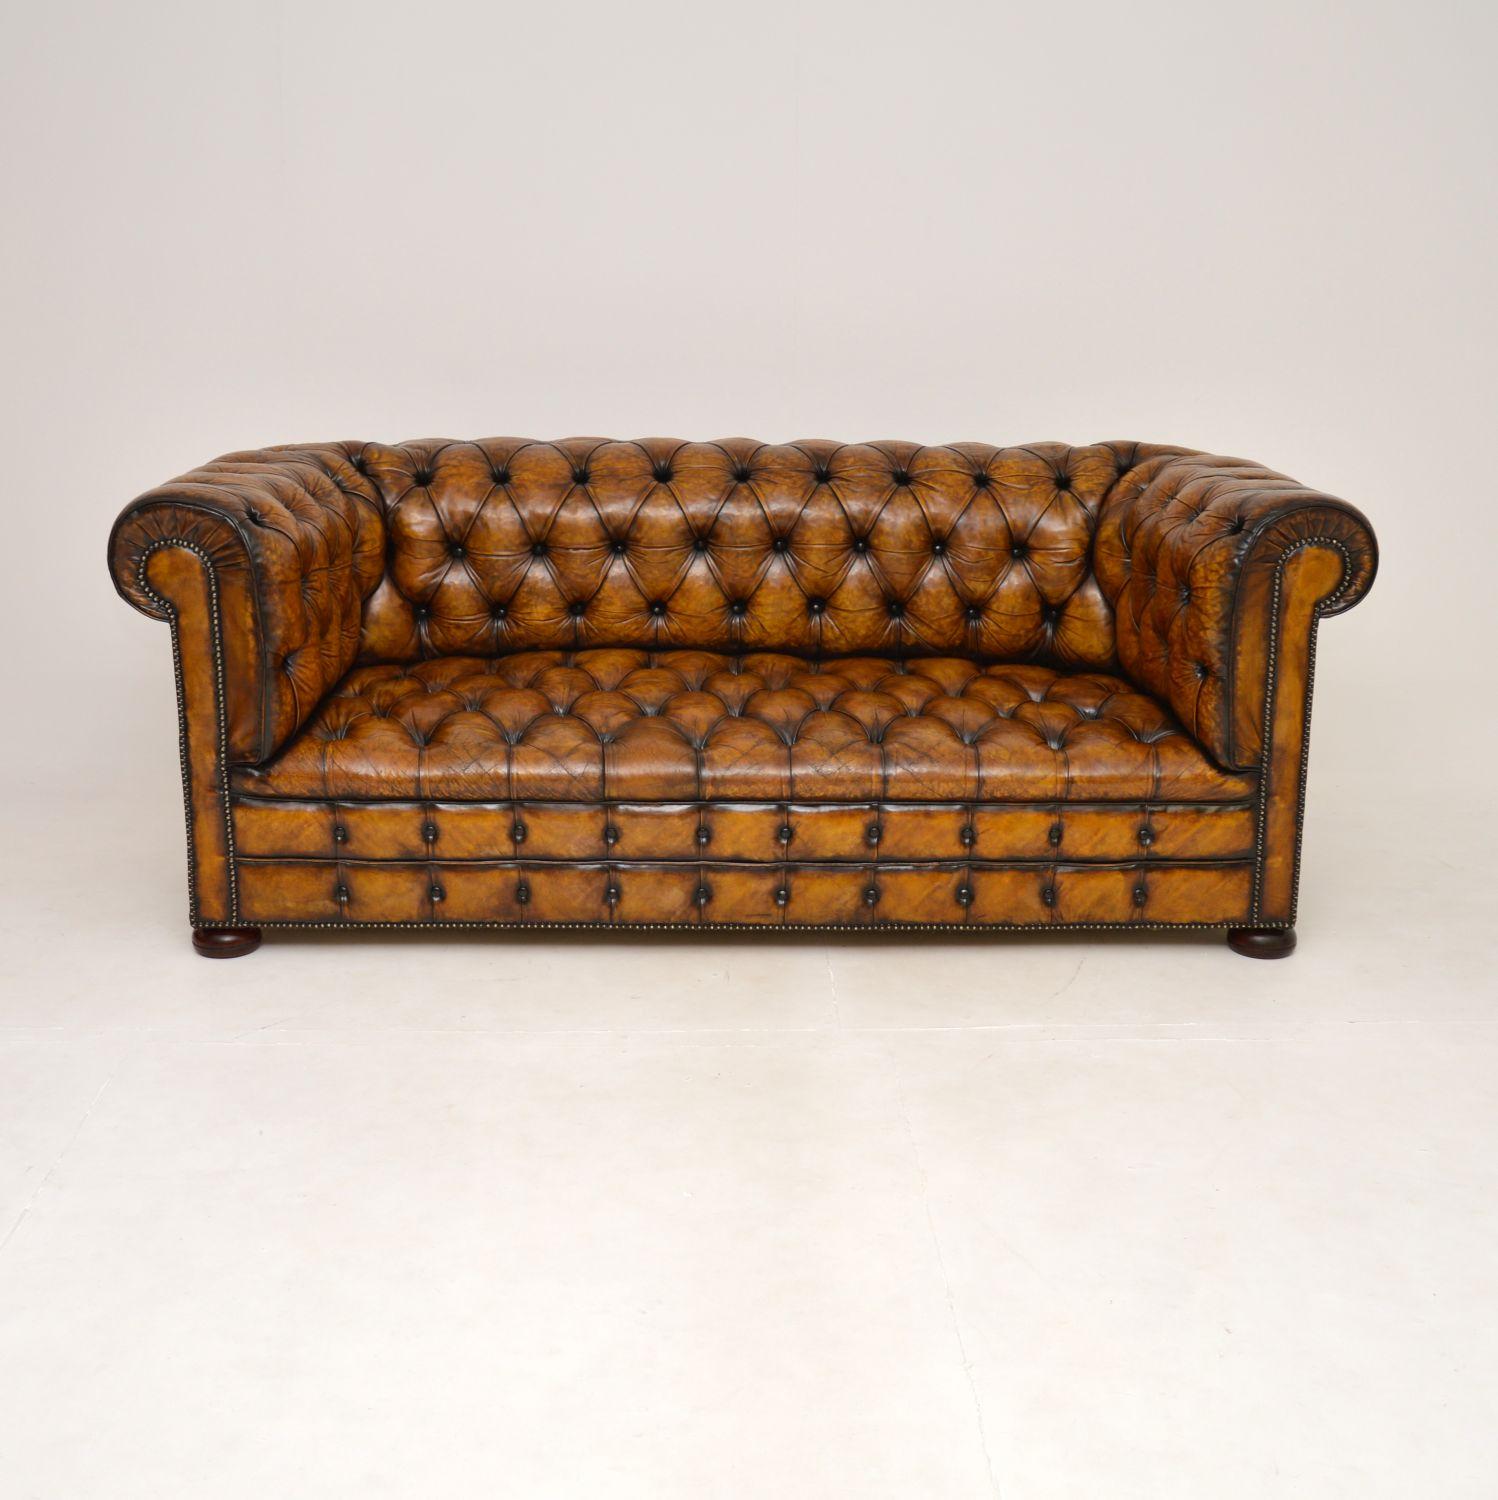 A magnificent antique deep buttoned leather Chesterfield sofa. This was made in England, we would date it to around the 1920’s.

It is of outstanding quality, this is extremely well built and heavy. It has crisp horse hair stuffing, it is very